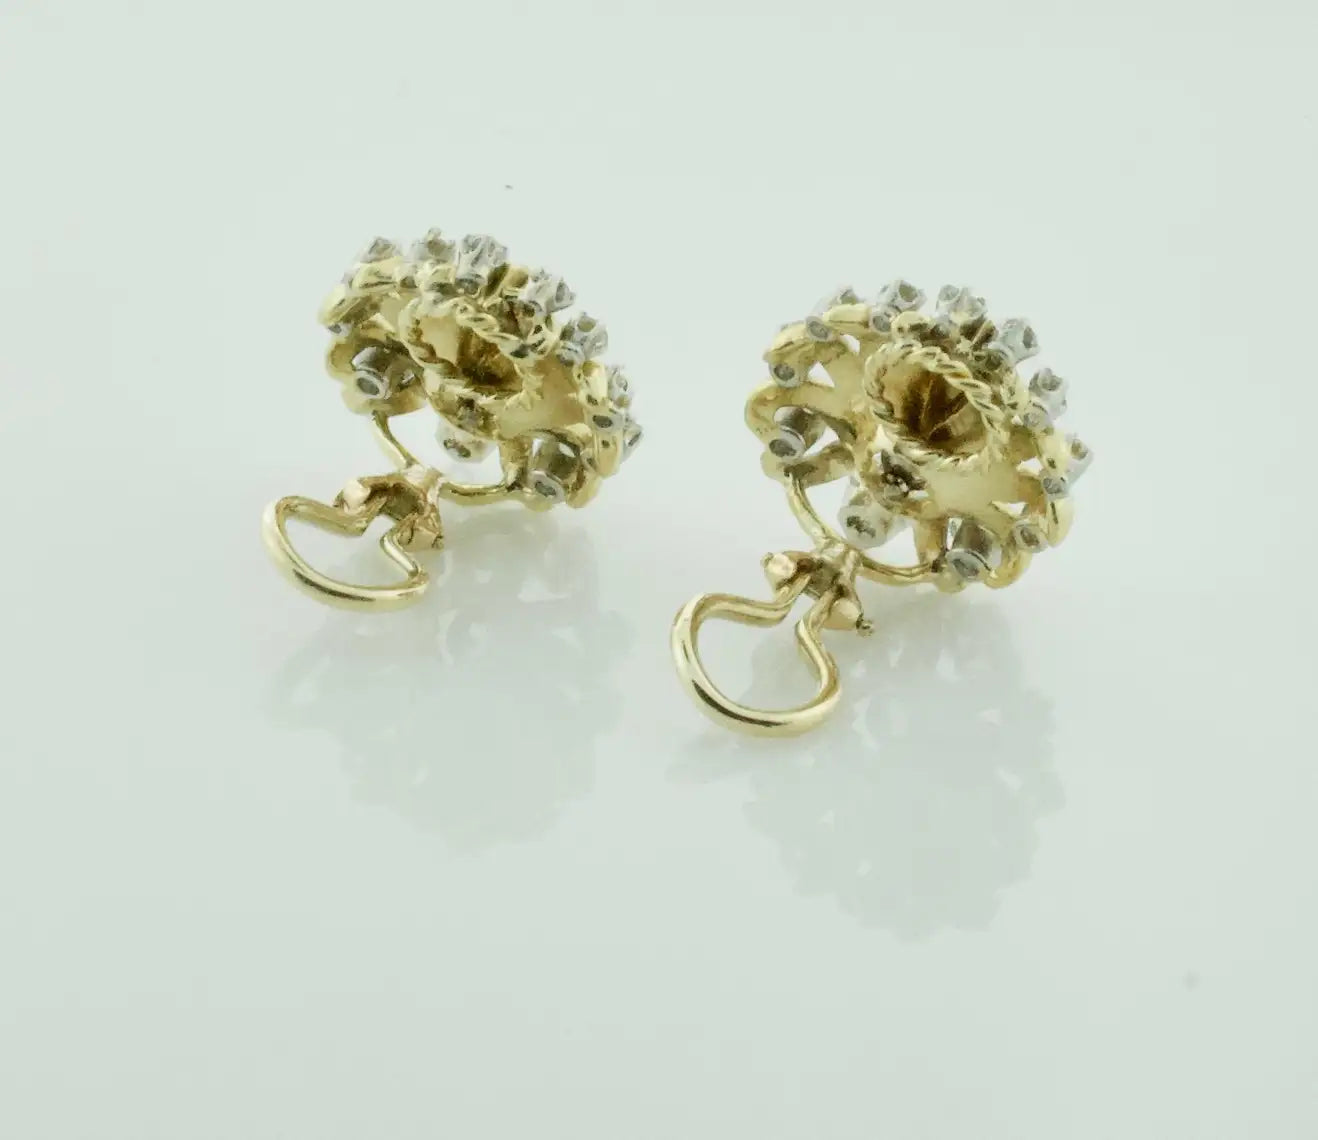 Delightful 18k Yellow and White Gold Earrings, Circa 1950's